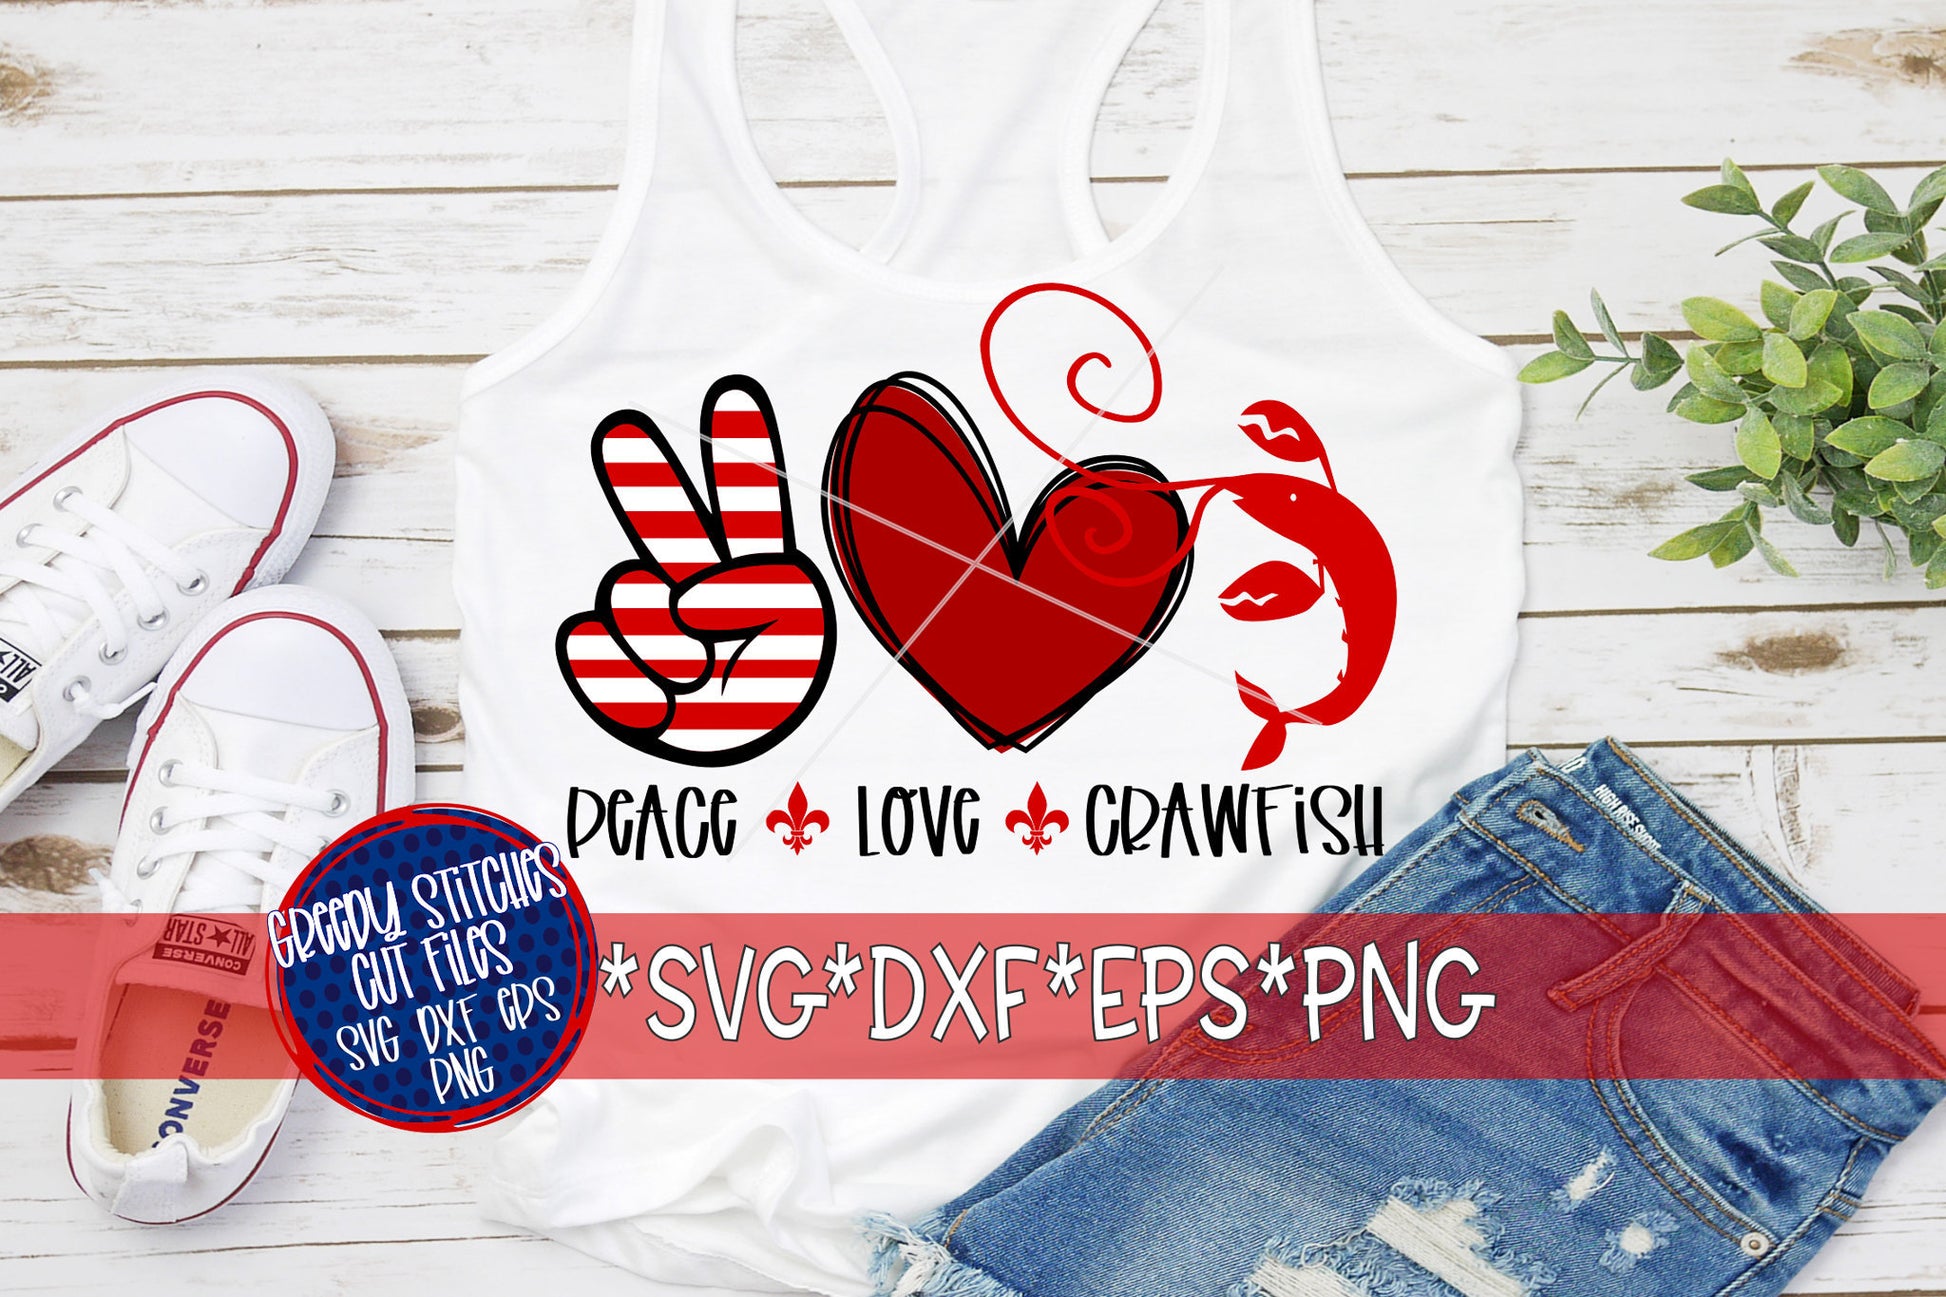 Peace Love Crawfish svg, dxf, eps, and png.  Mardi Gras SvG | Love Crawfish SVG | Crawfish Boil | Crawfish SvG | Instant Download Cut Files.